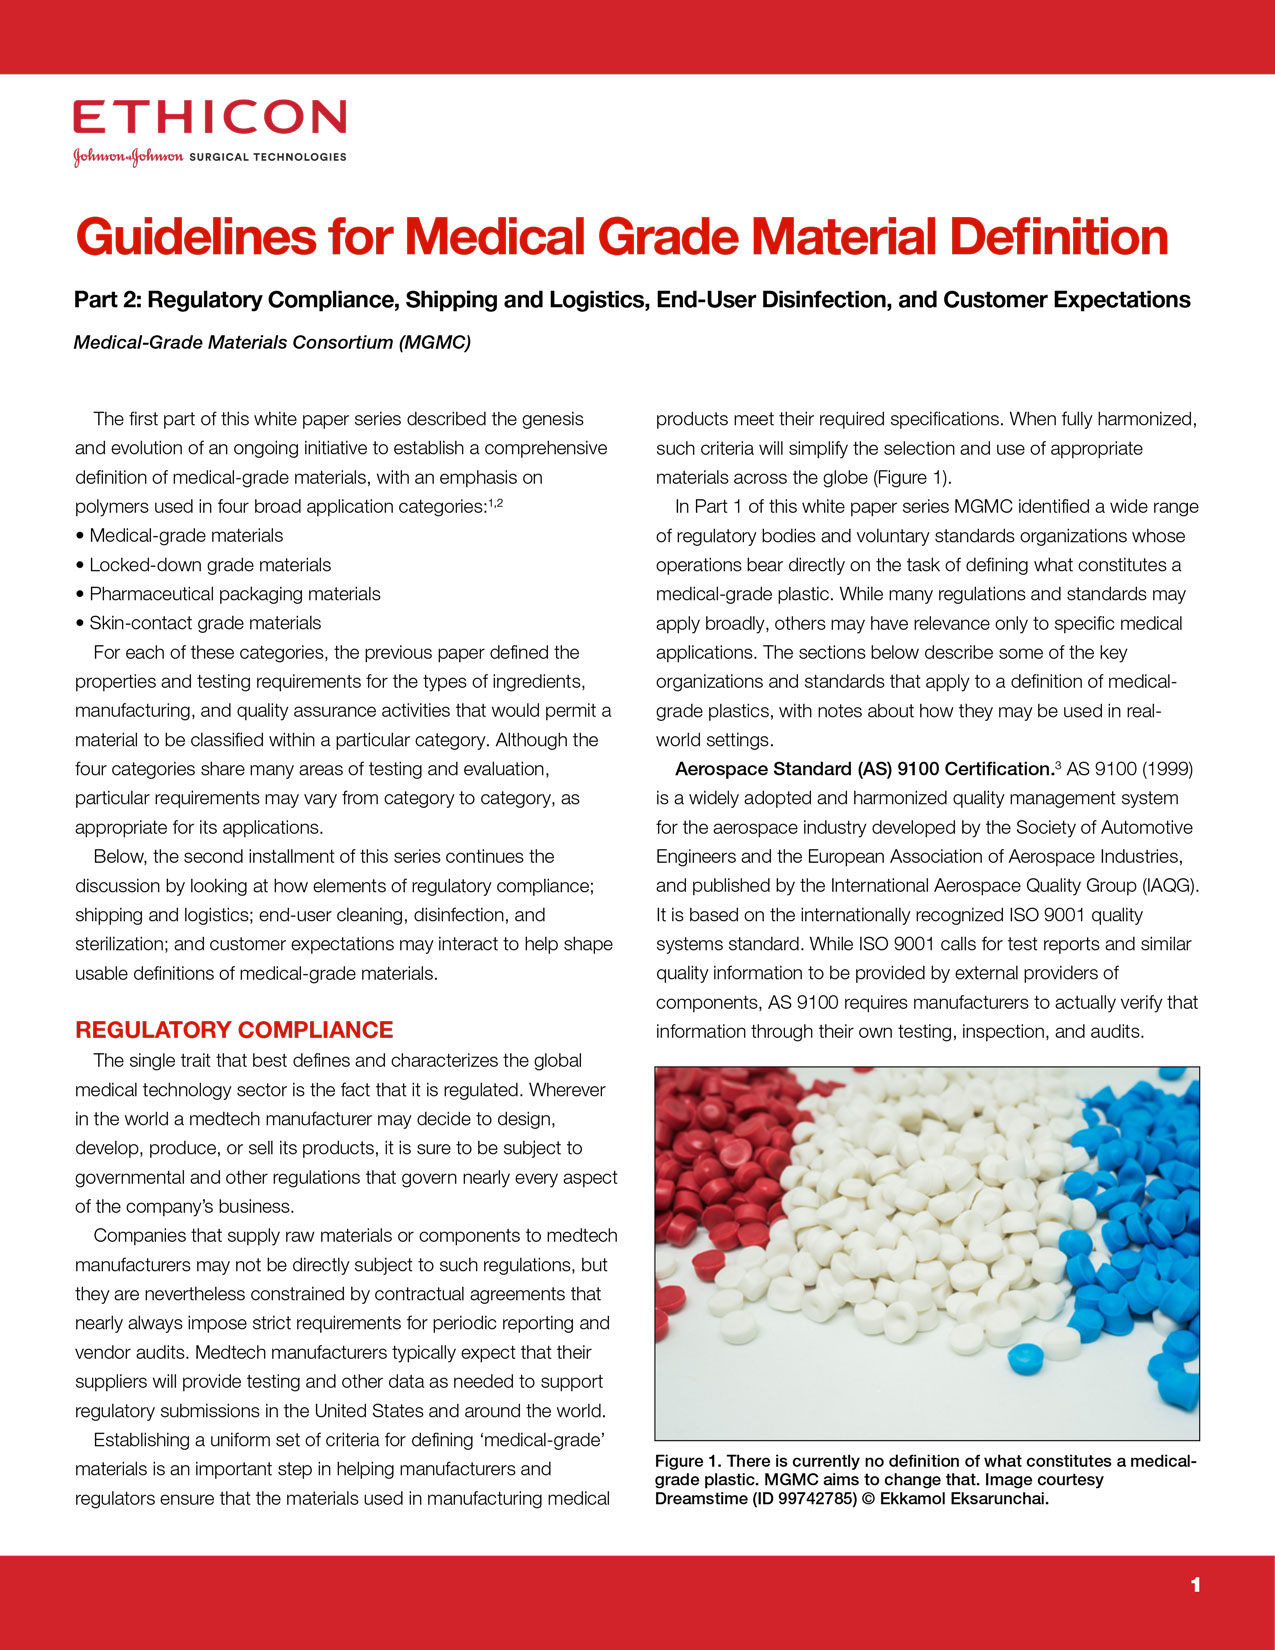 MGMC2 Guidelines